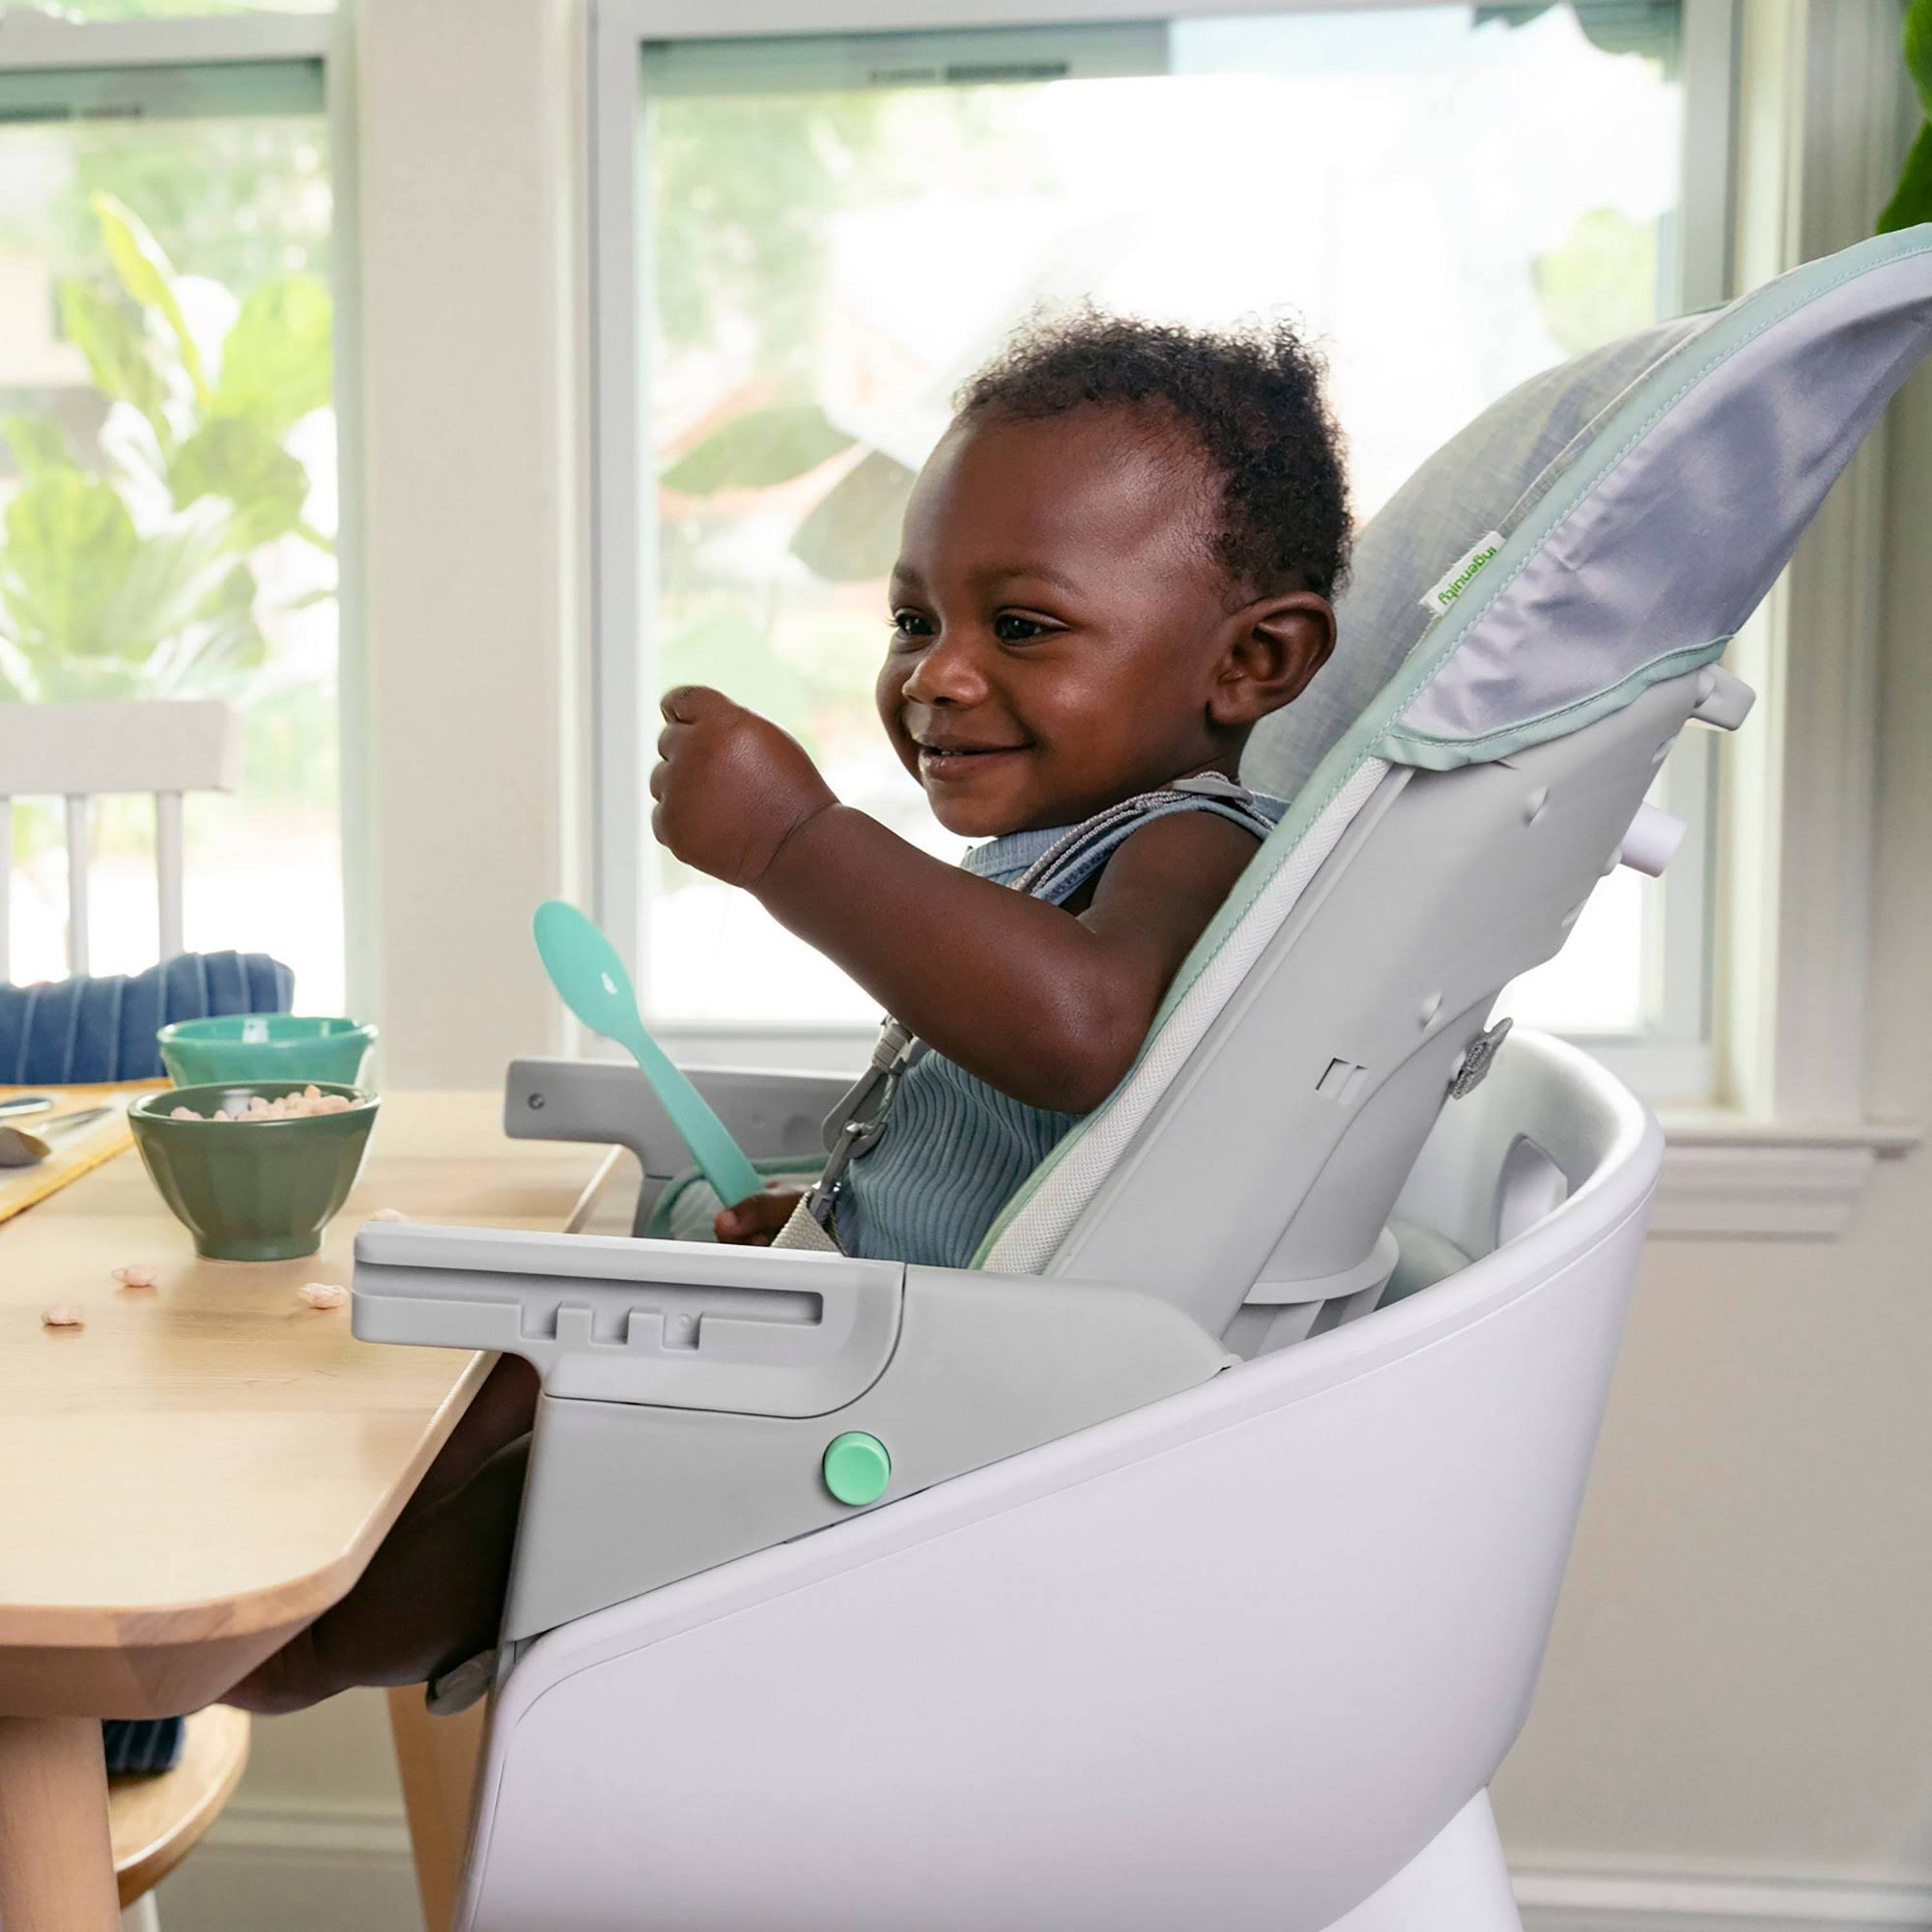 Ingenuity Beanstalk Baby to Big Kid 6-in-1 High Chair Converts from Soothing Infant Seat to Dining Booster Seat and More, Newborn to 5 yrs  C Ray